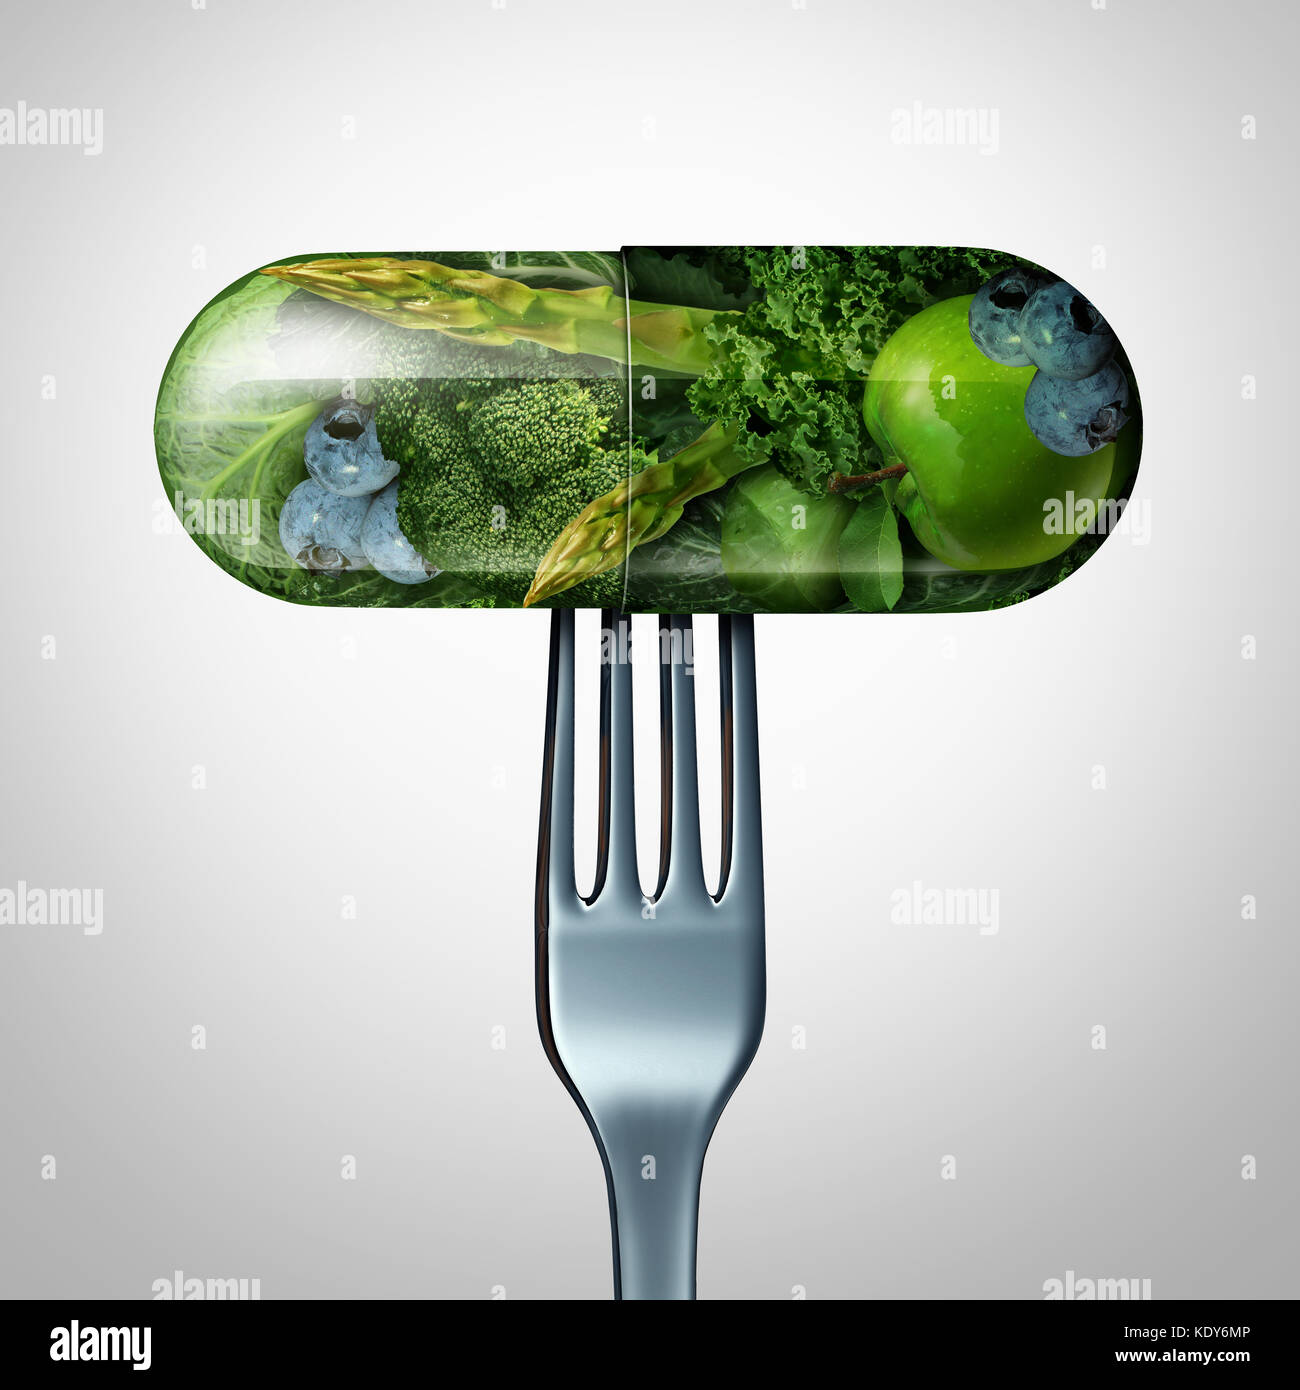 Natural food supplement concept as a pill or medicine capsule with fresh fruit and vegetables inside on a fork as a nutrition and dietary vitamin. Stock Photo